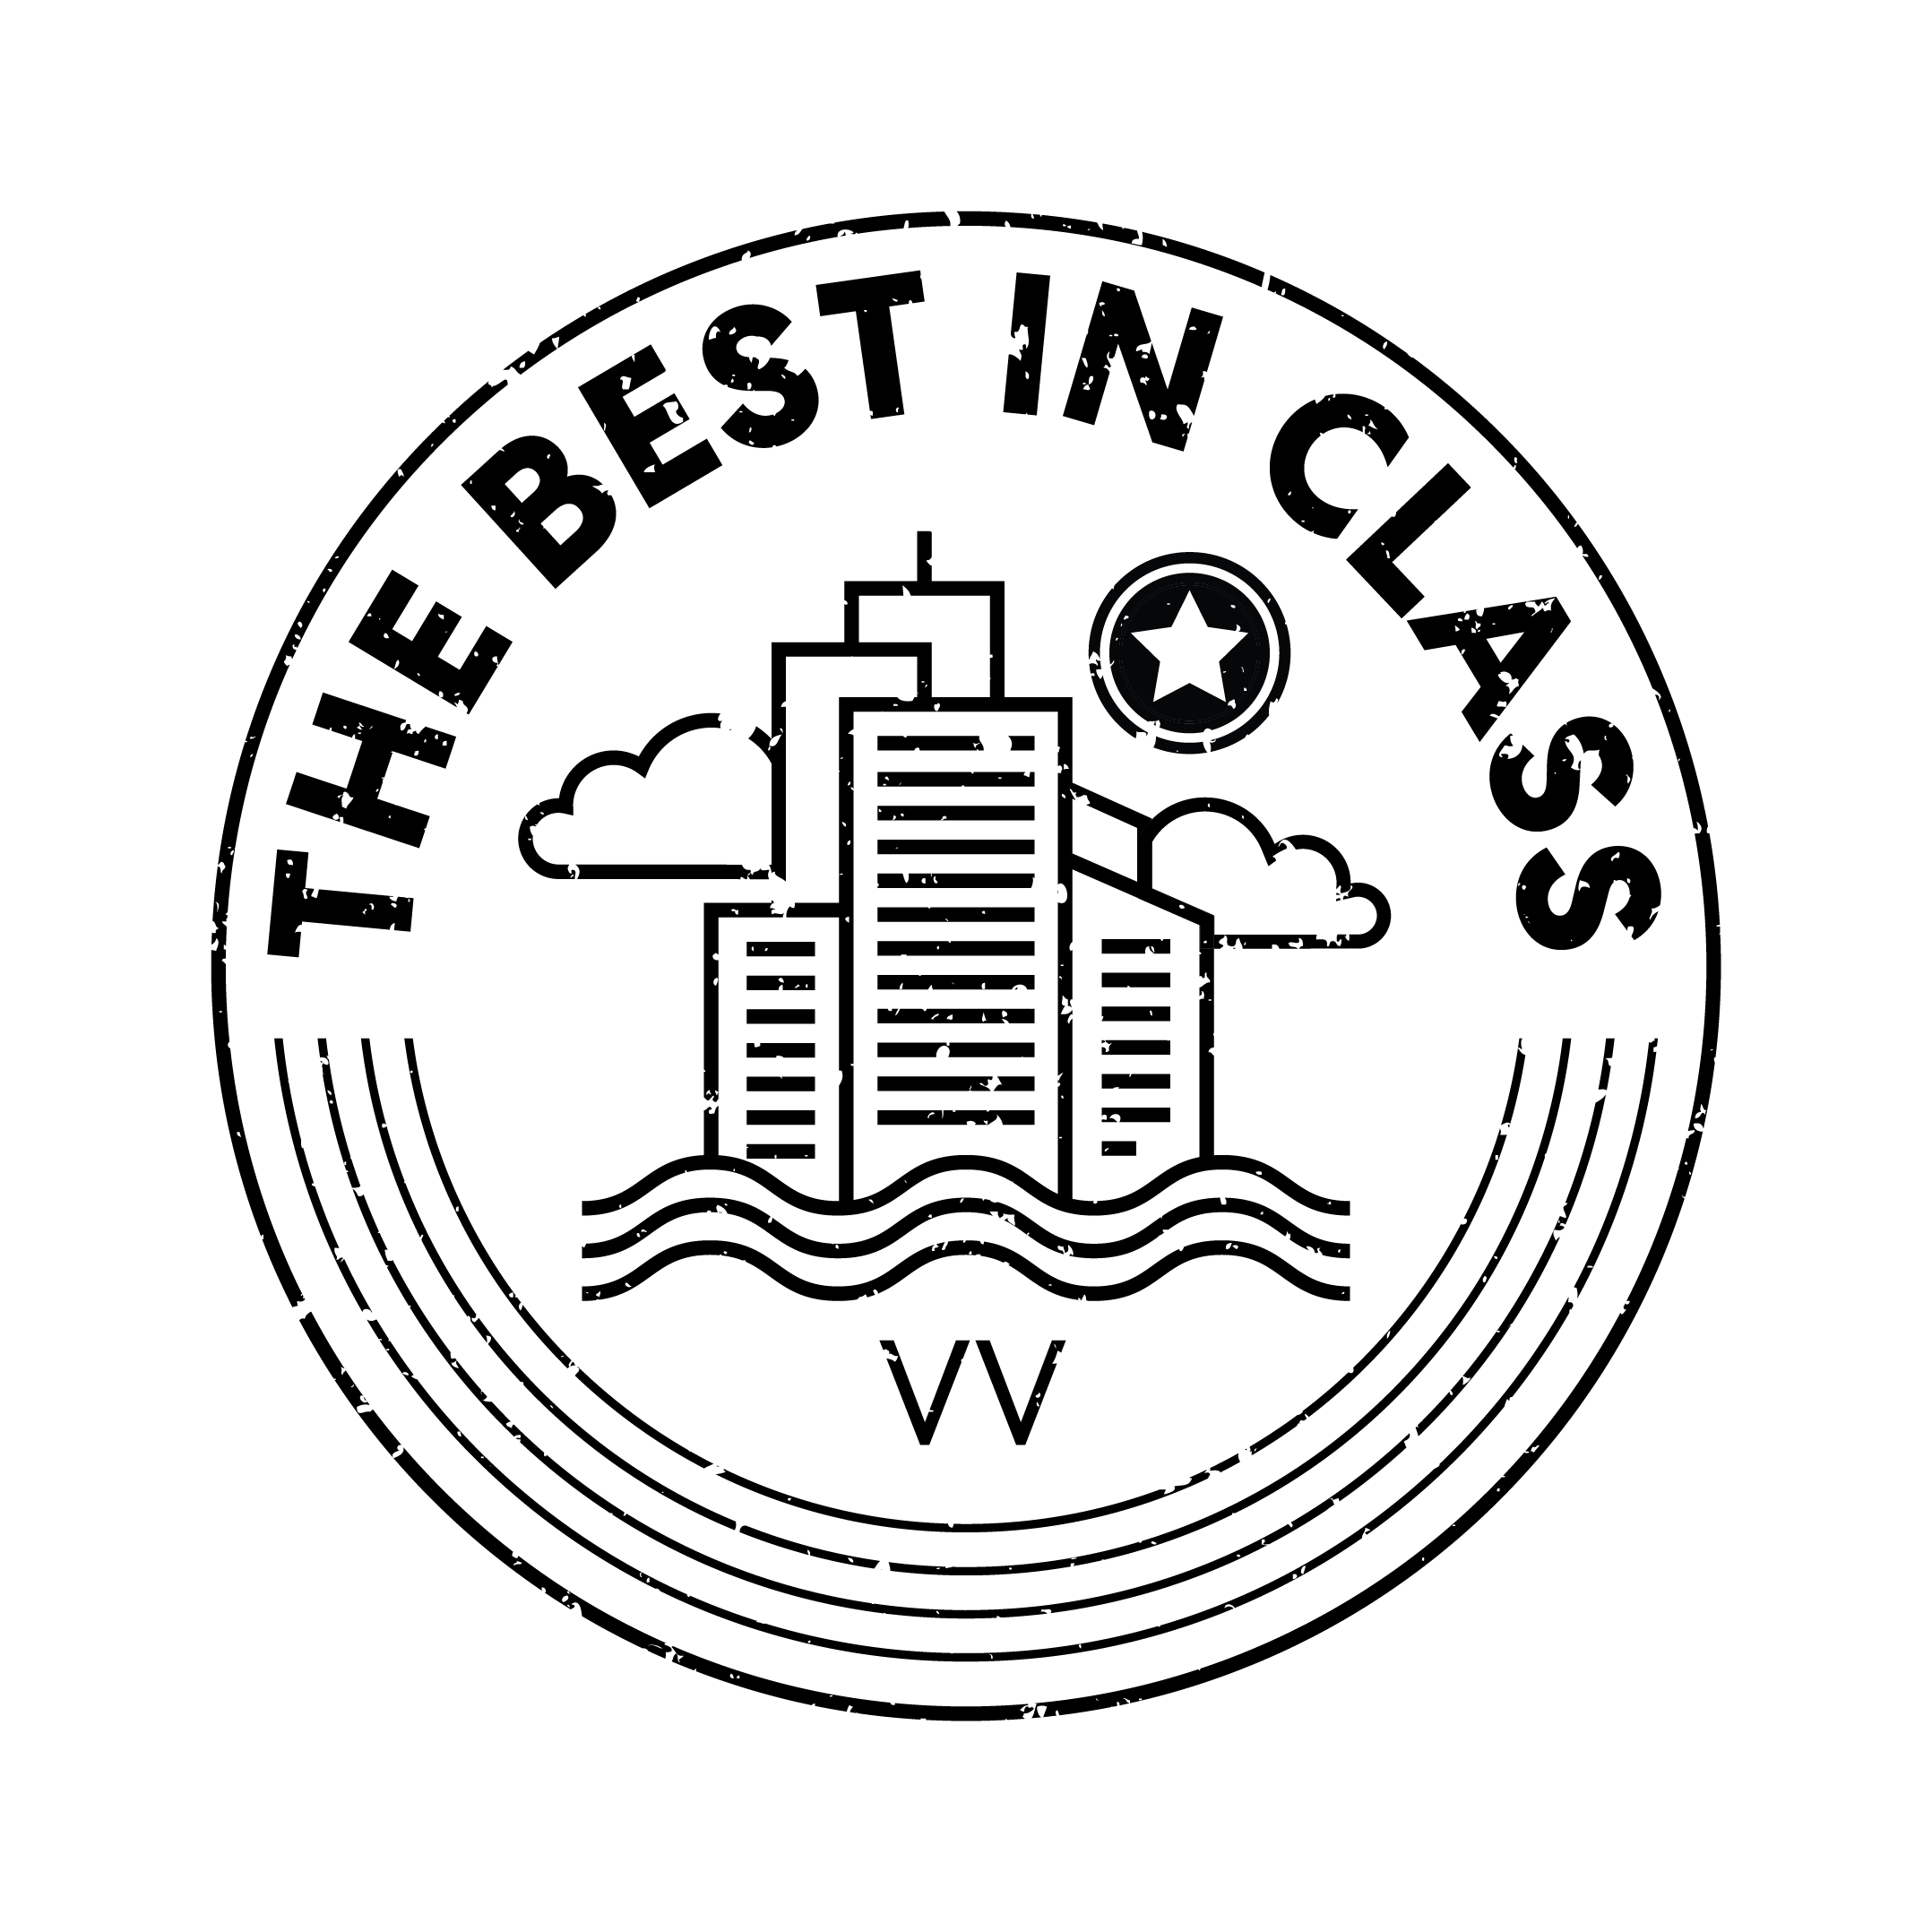 The Best In Class icon